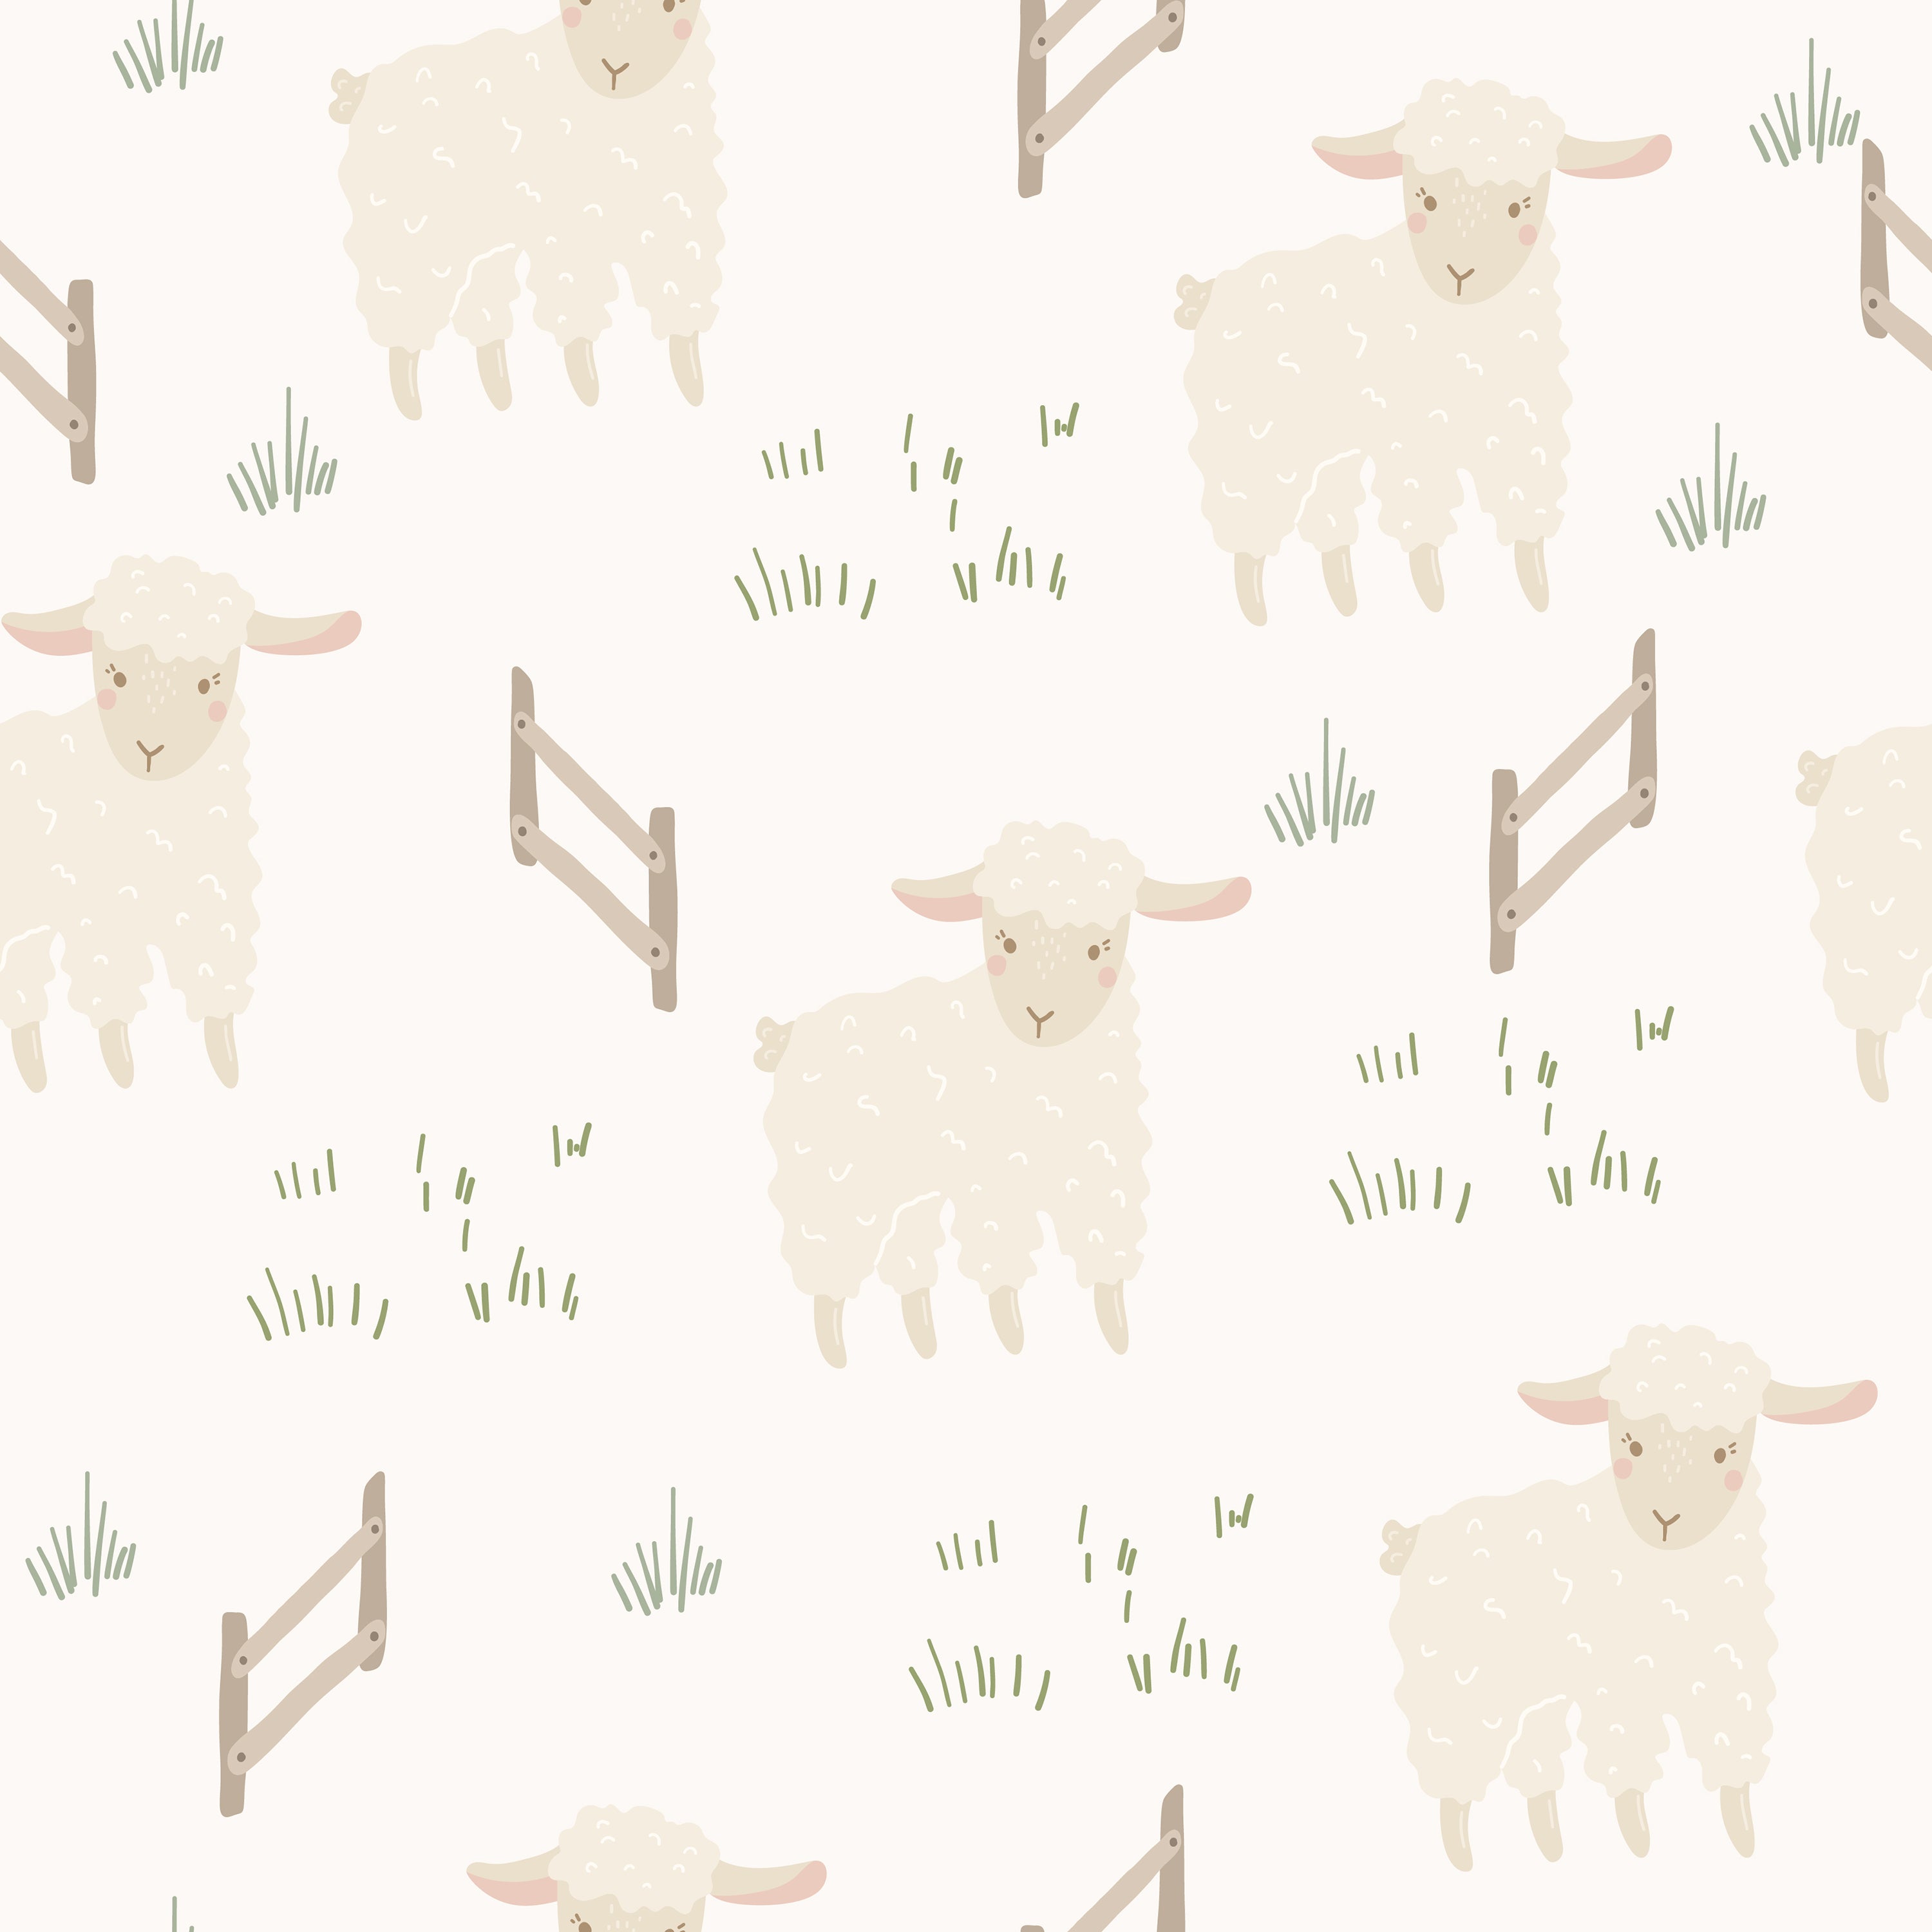 Playful children's room wallpaper featuring a pattern of fluffy white sheep and wooden fences scattered amongst patches of green grass on a soft cream background, creating a serene and charming farm scene.